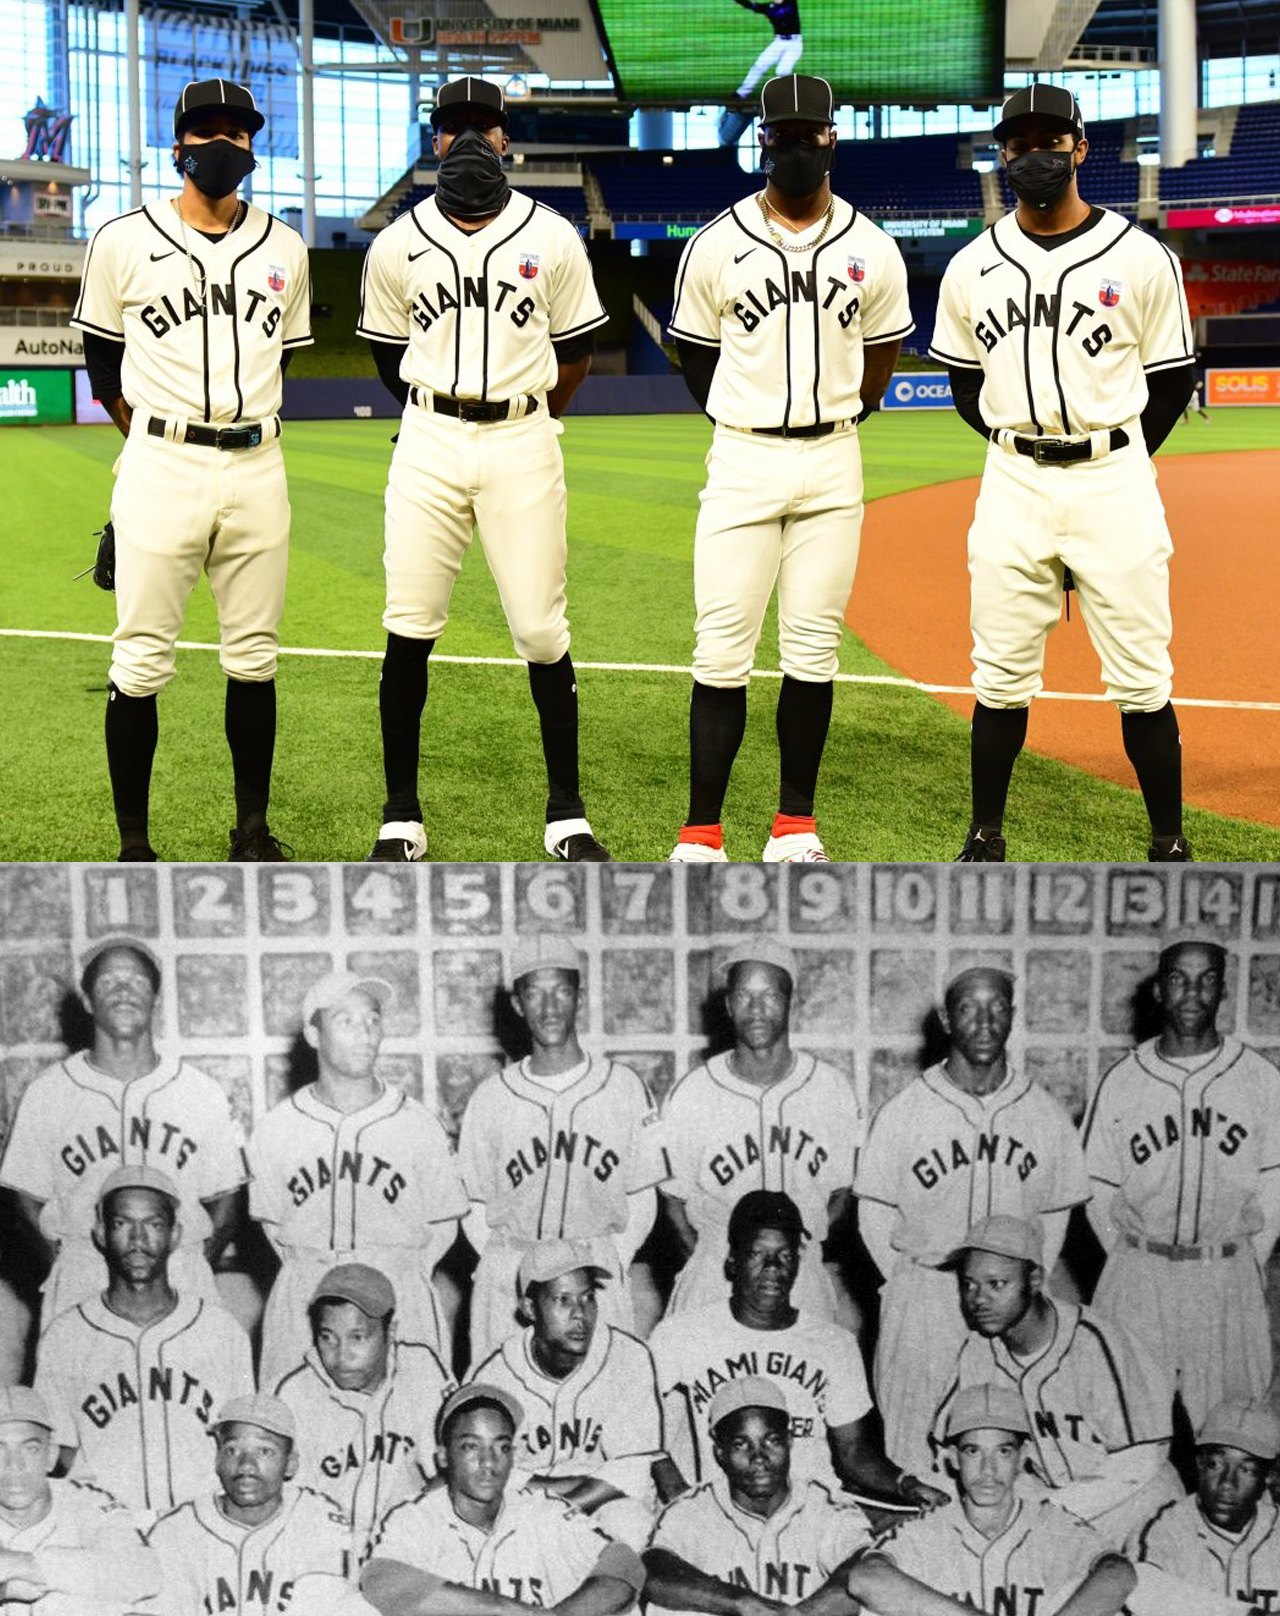 Todd Radom on X: Marlins honoring the Miami Giants today. In 1934